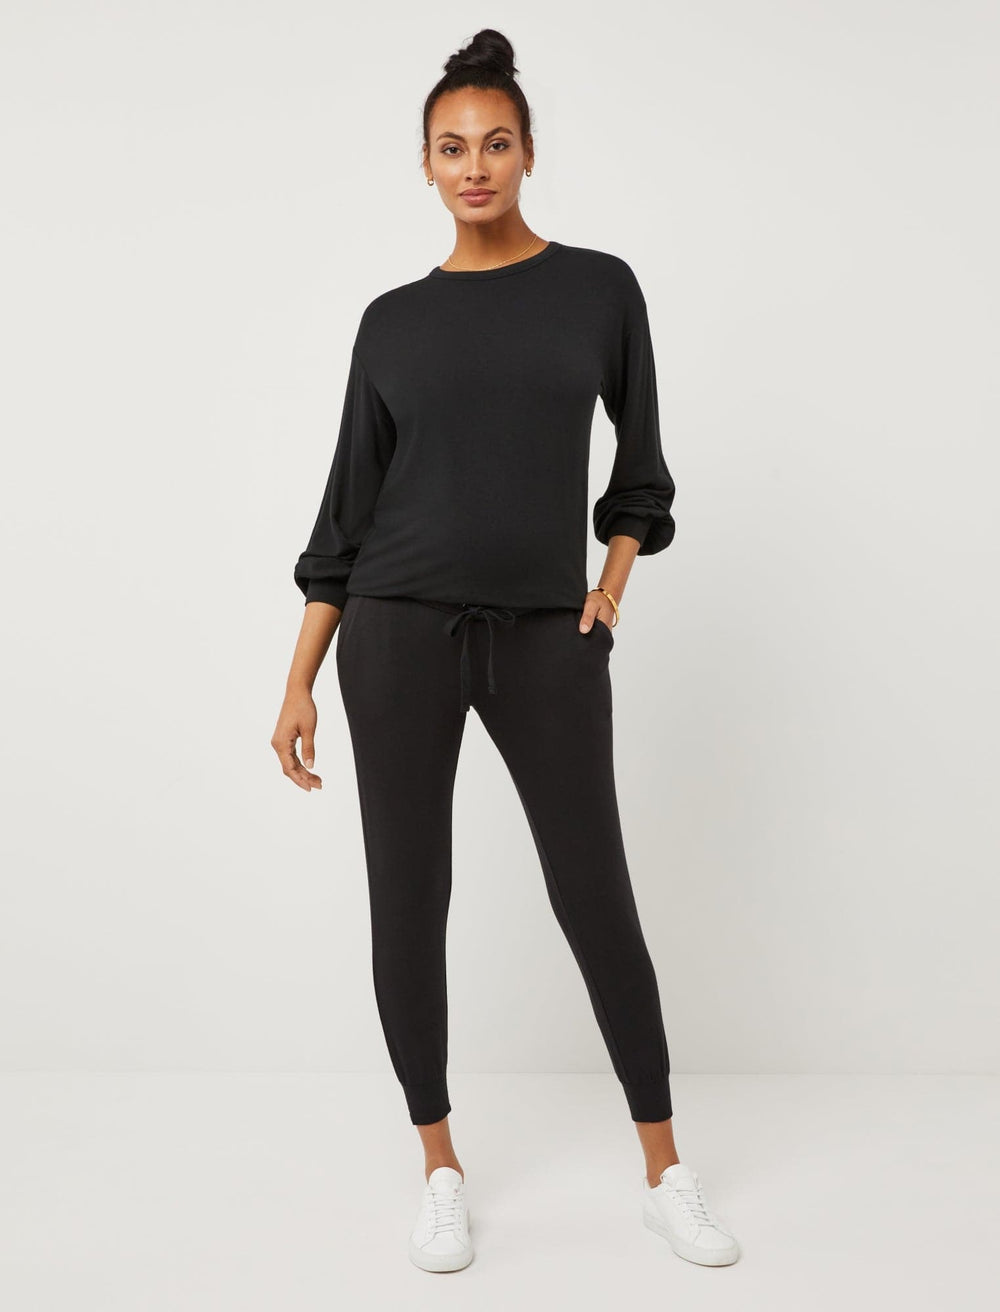 Under Belly French Terry Maternity Jogger Pant - A Pea In the Pod